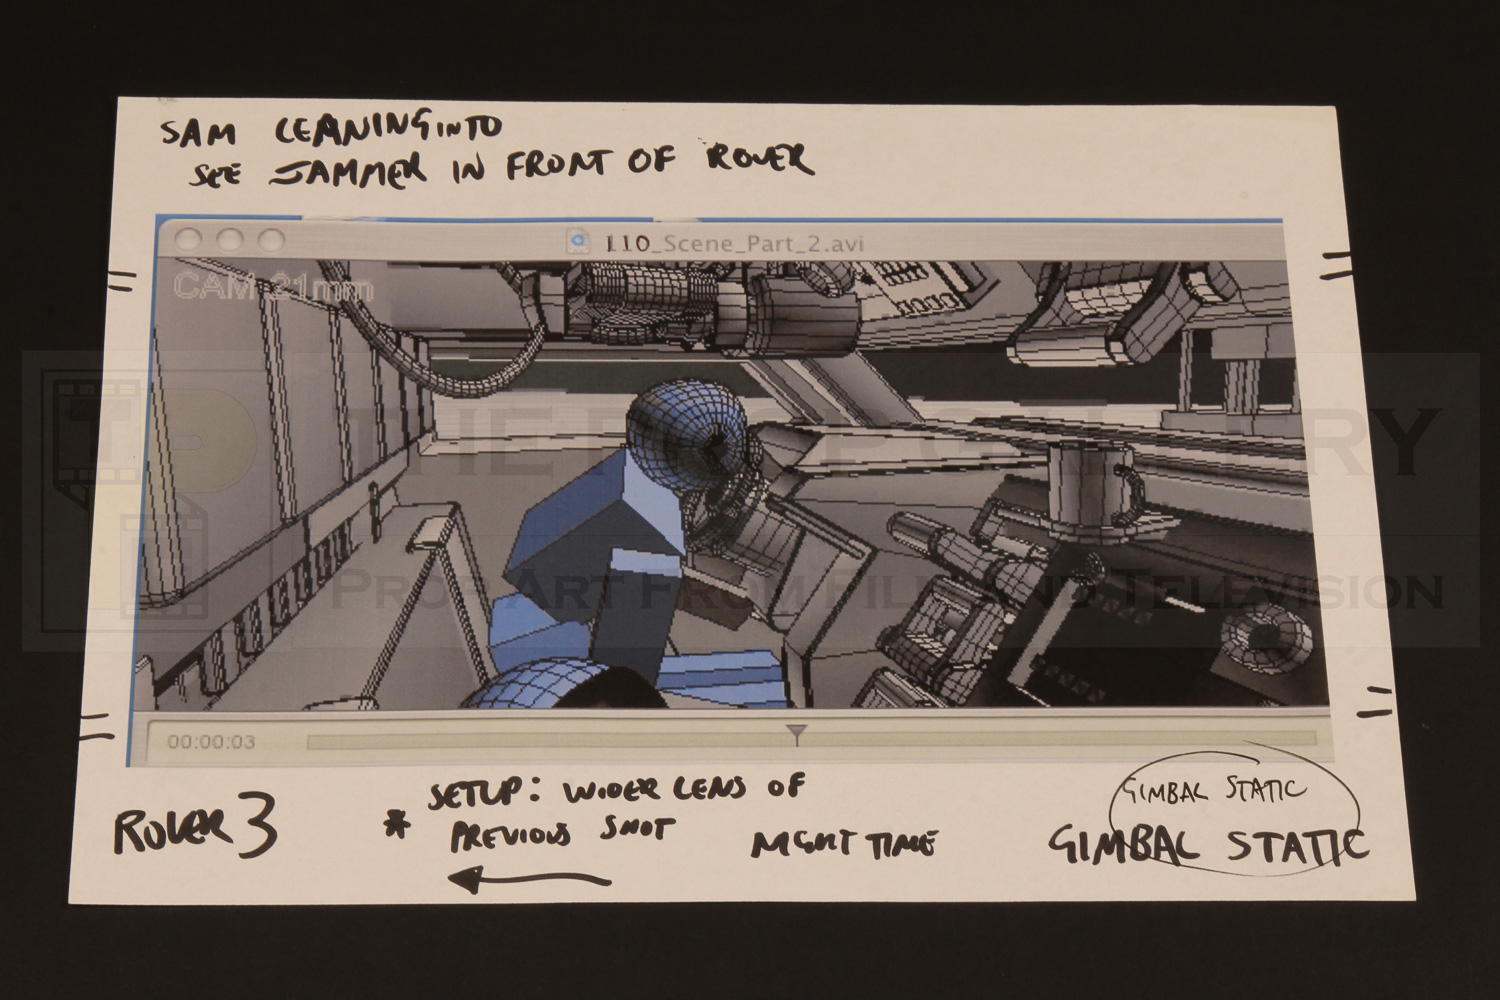 From script to screen - storyboarding the motion picture.